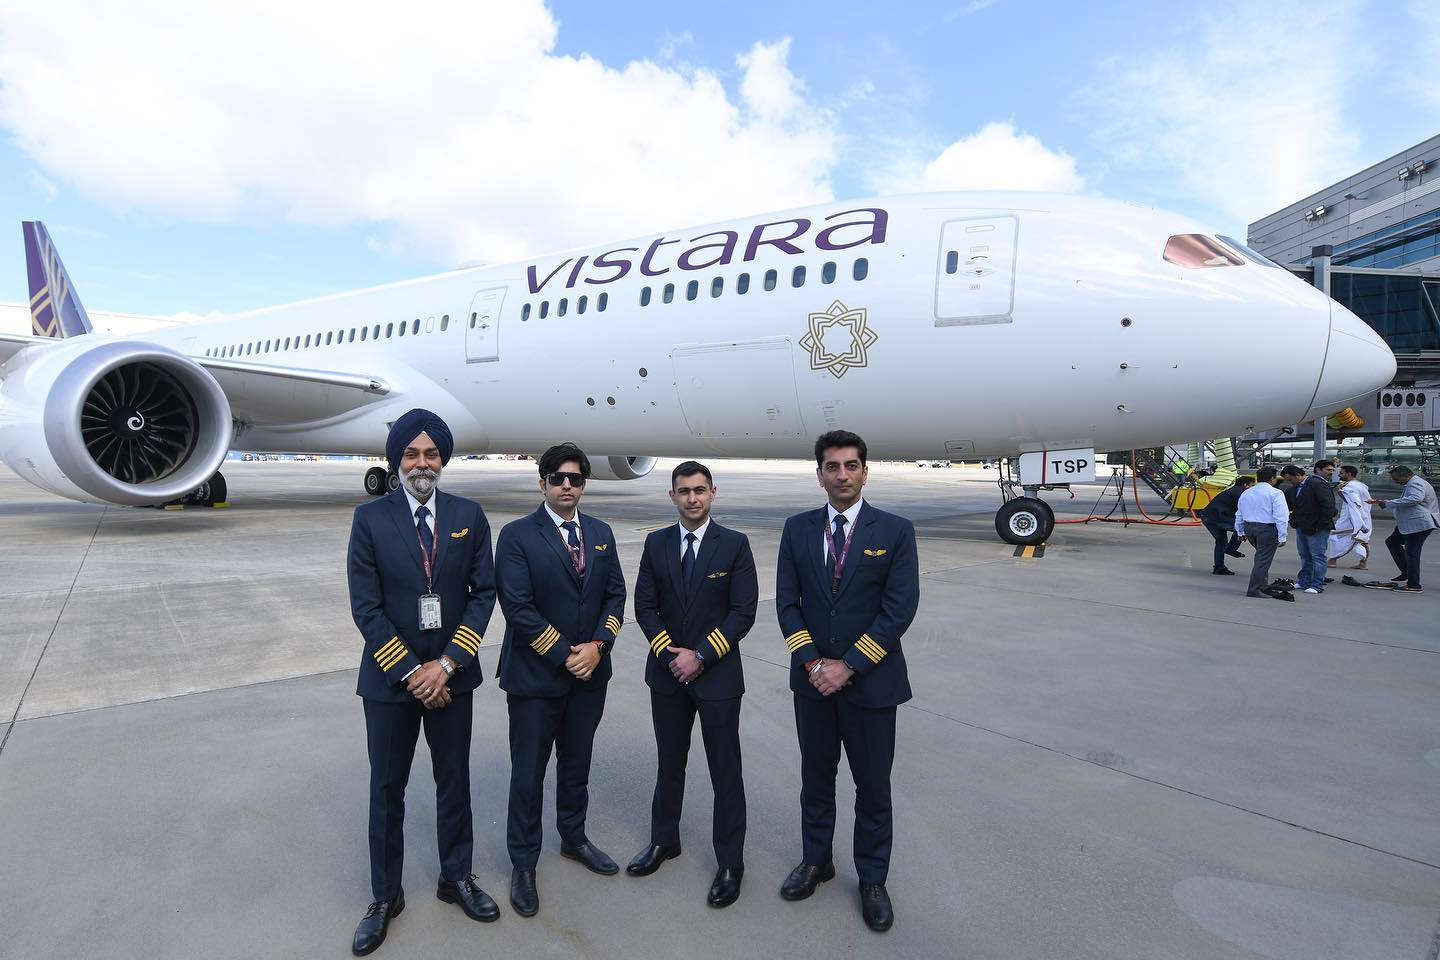 Tata-Singapore Airlines joint venture to be called Vistara | Mint